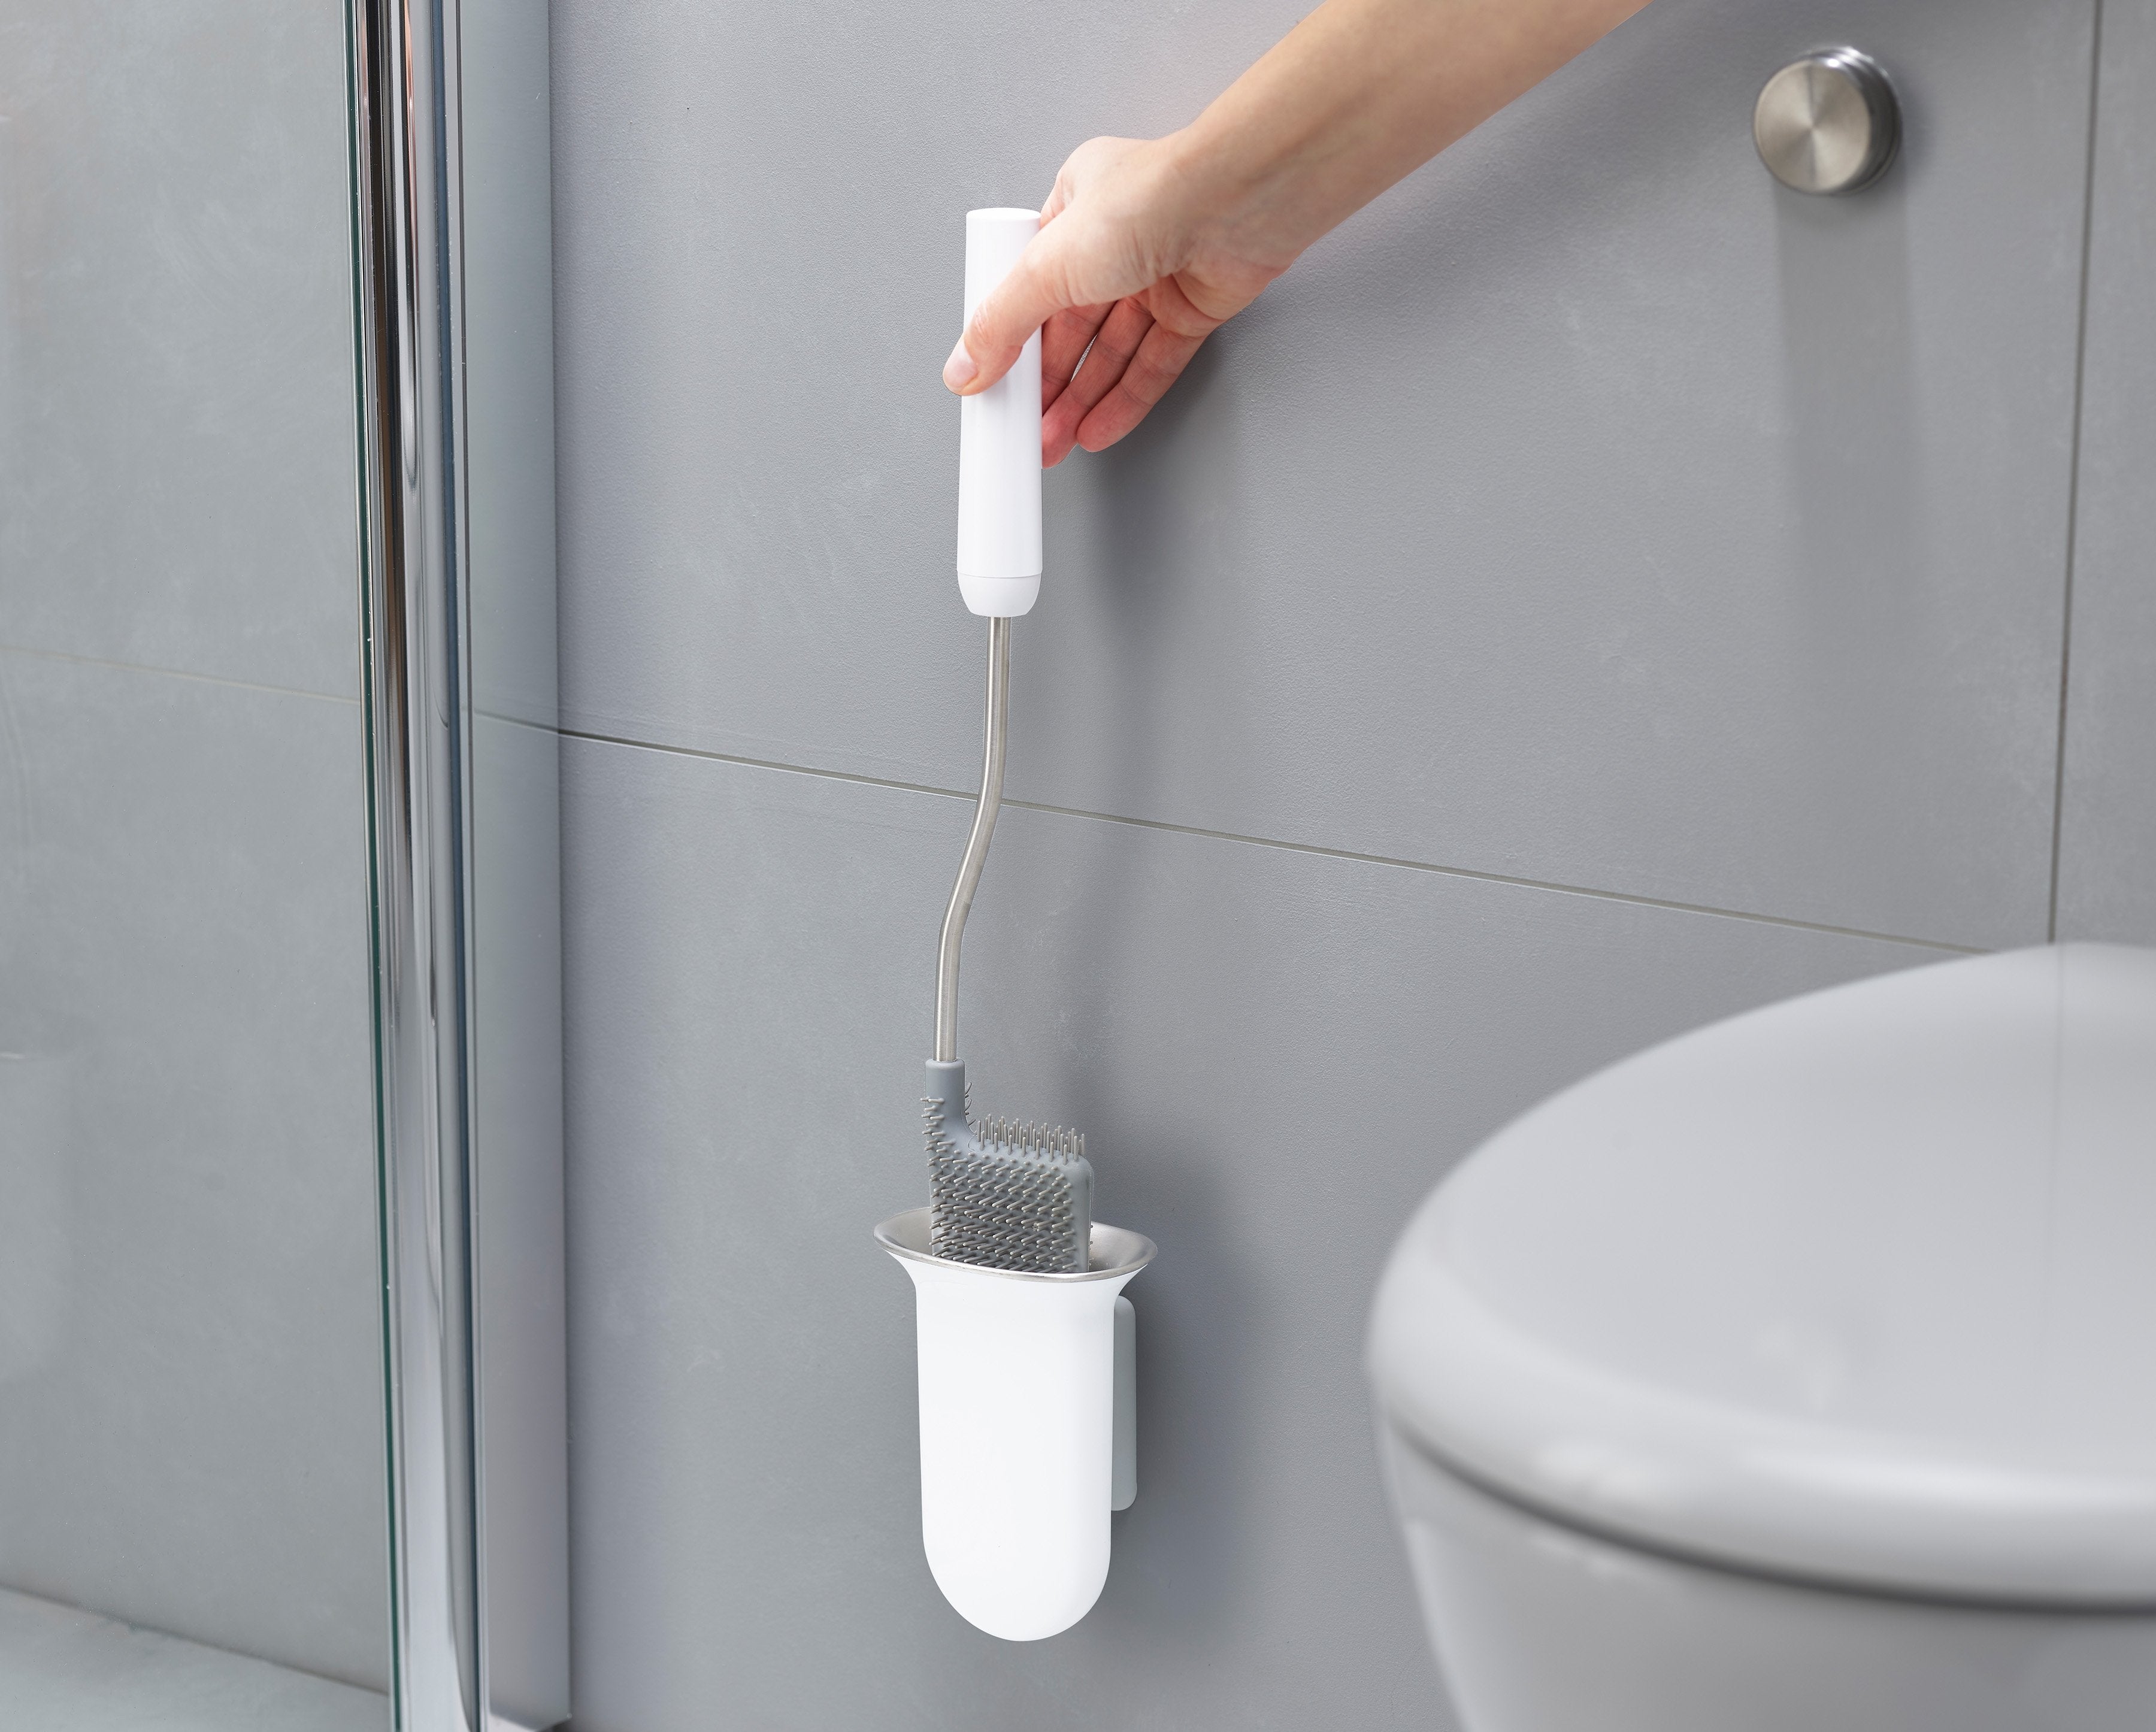 BEON.COM.AU  This version of our bestselling toilet brush comes with a smart wall-mounted holder which saves valuable floor space and makes cleaning easier.  Flexible, D-shaped head reaches all areas, even under the rim Anti-drip: less dripping between cleaning and storing Anti-clog: wide bristle spacing ens... Joseph Joseph at BEON.COM.AU